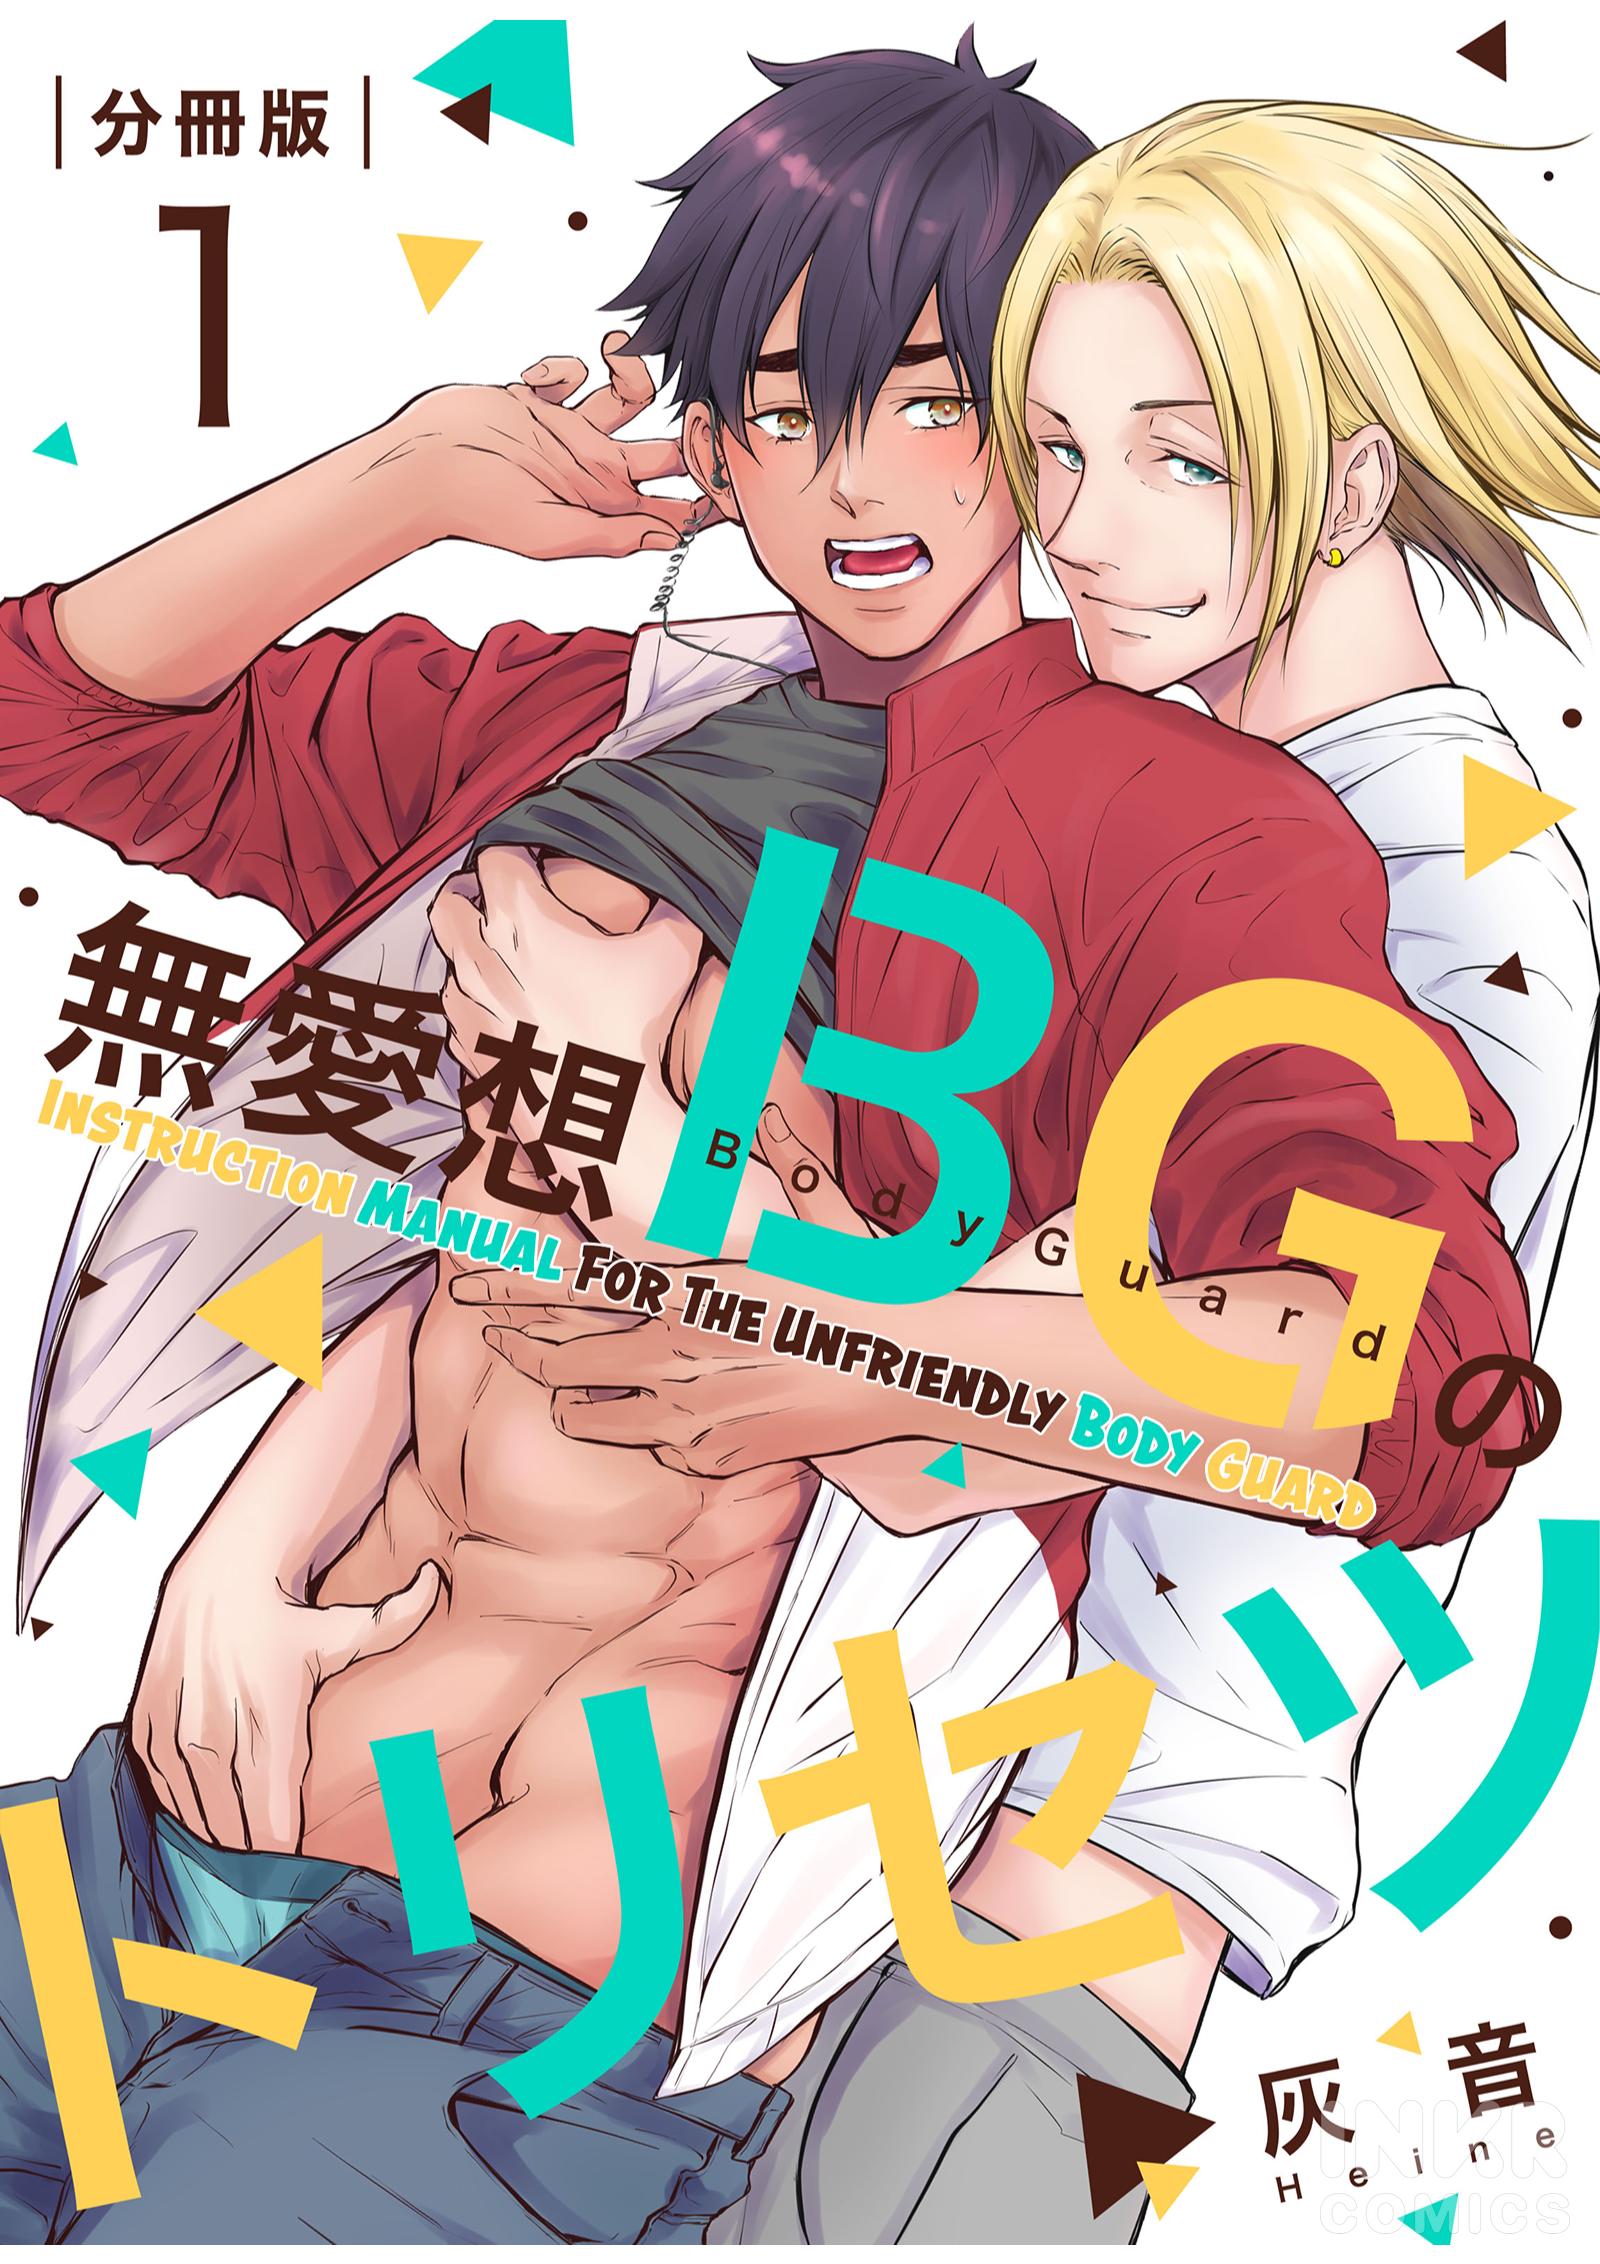 Buaisou Bg No Torisetsu Chapter 0: Free Preview Chapter - Picture 1